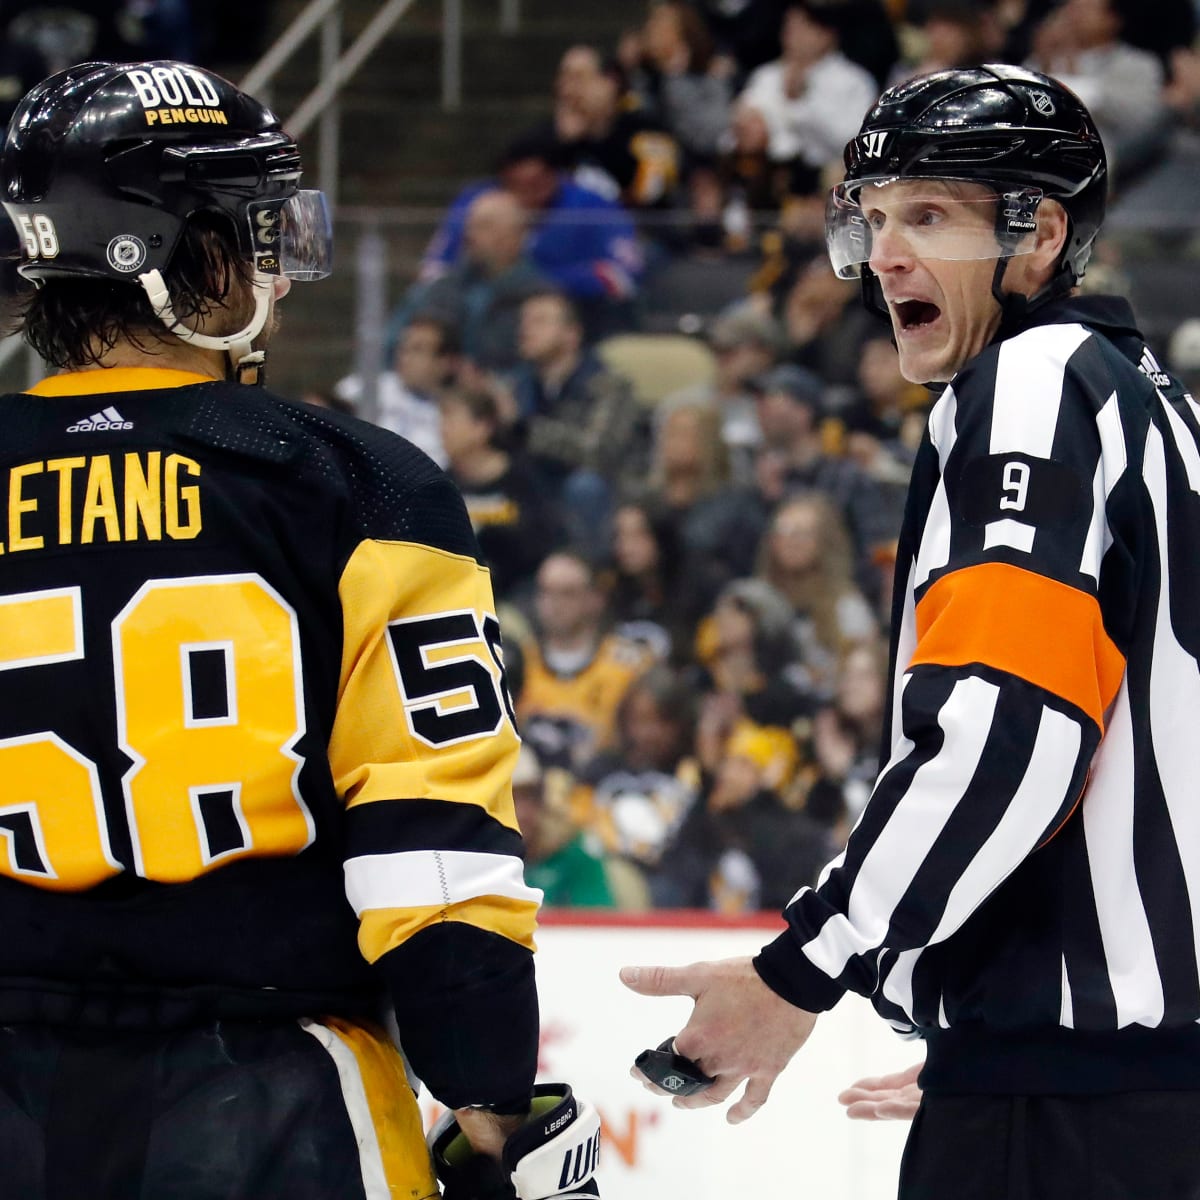 Should the NHL make referees give postgame interviews?